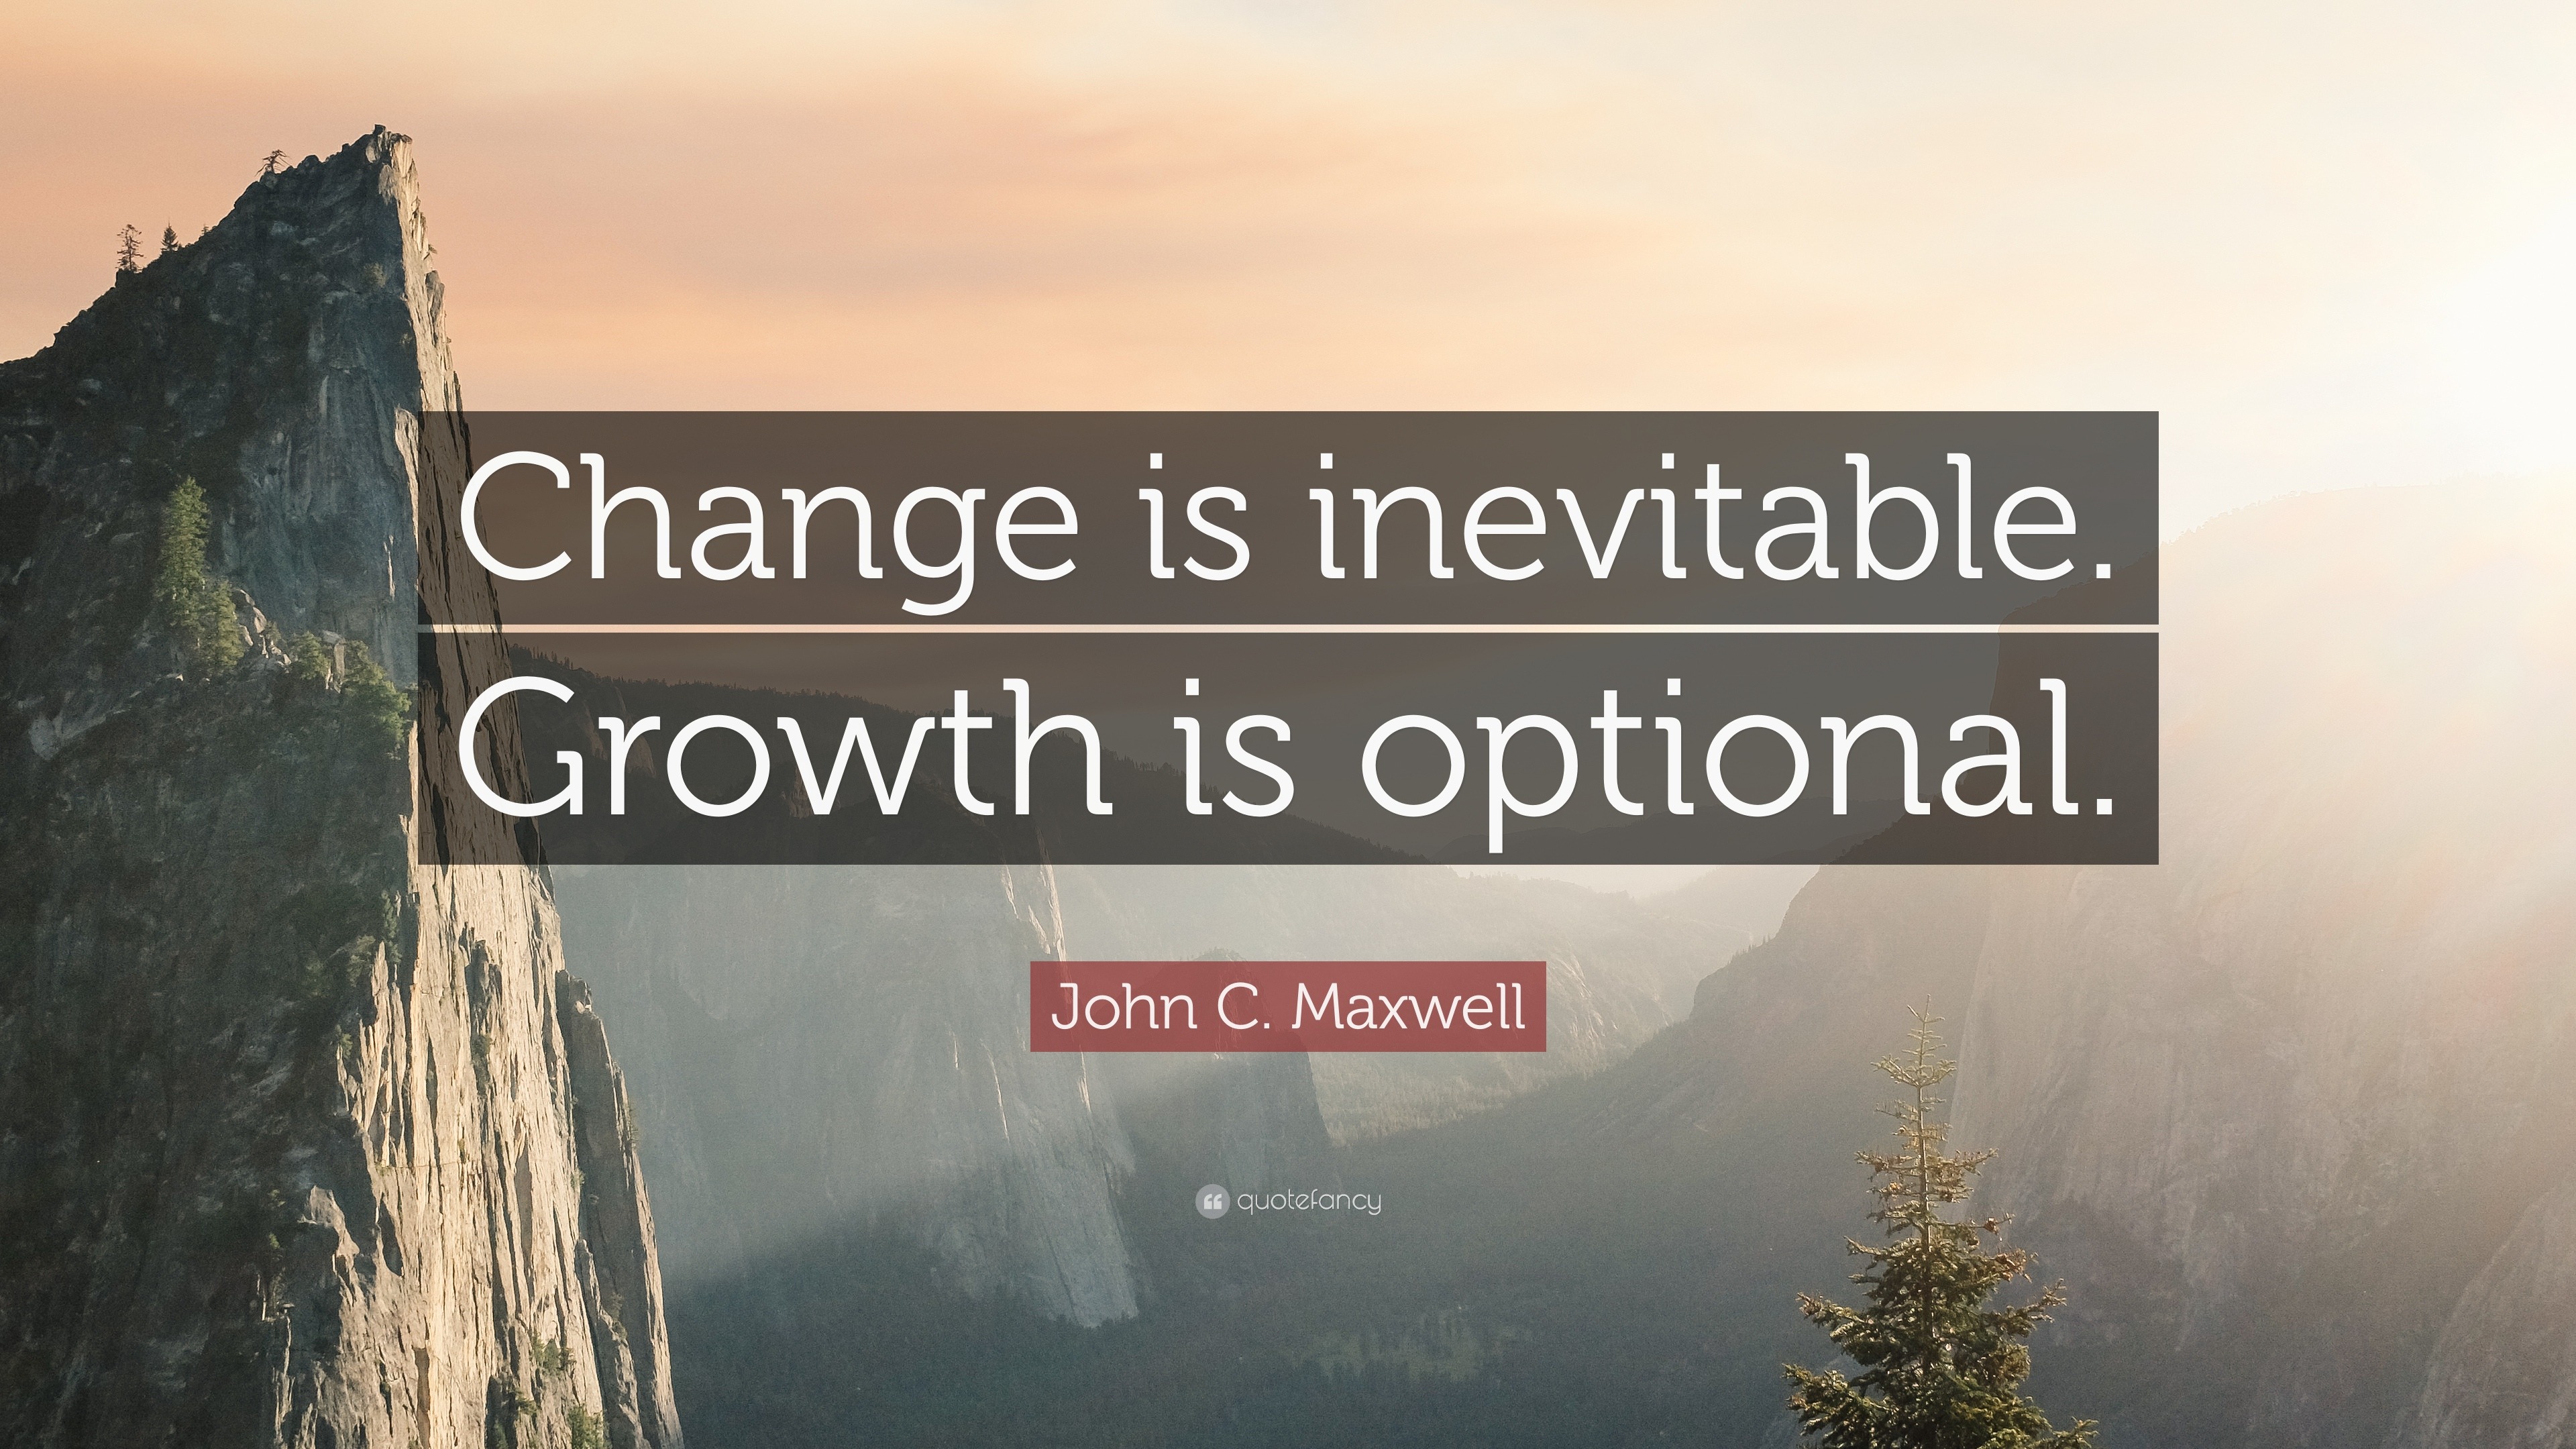 John C. Maxwell Quote “Change is inevitable. Growth is